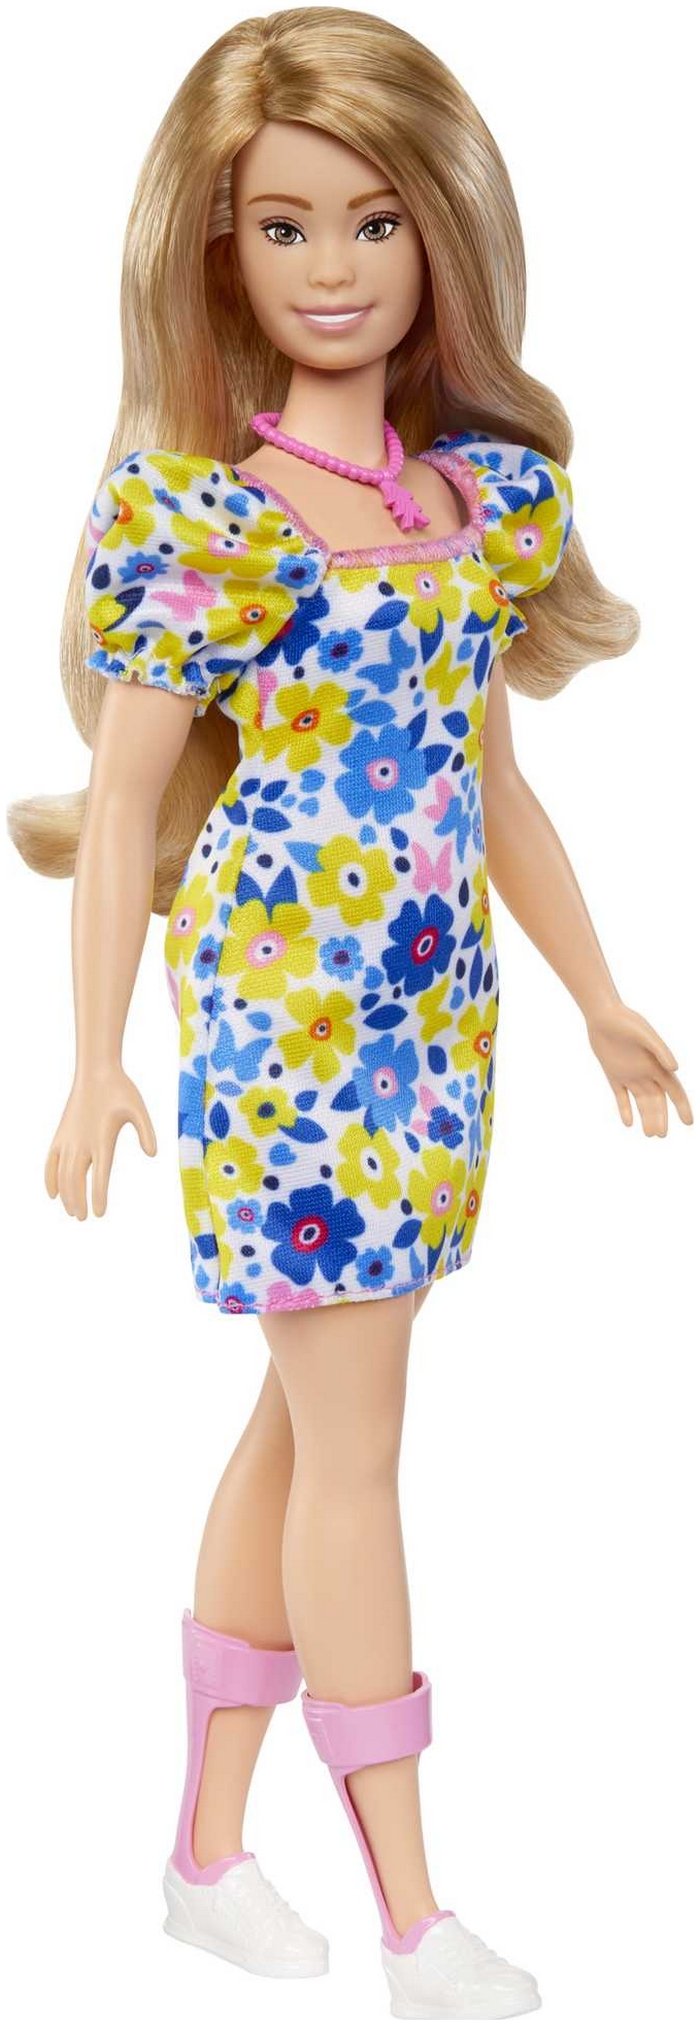 1673625540-youloveit-com-barbie-fashionistas-2023-down-sindrome-doll3